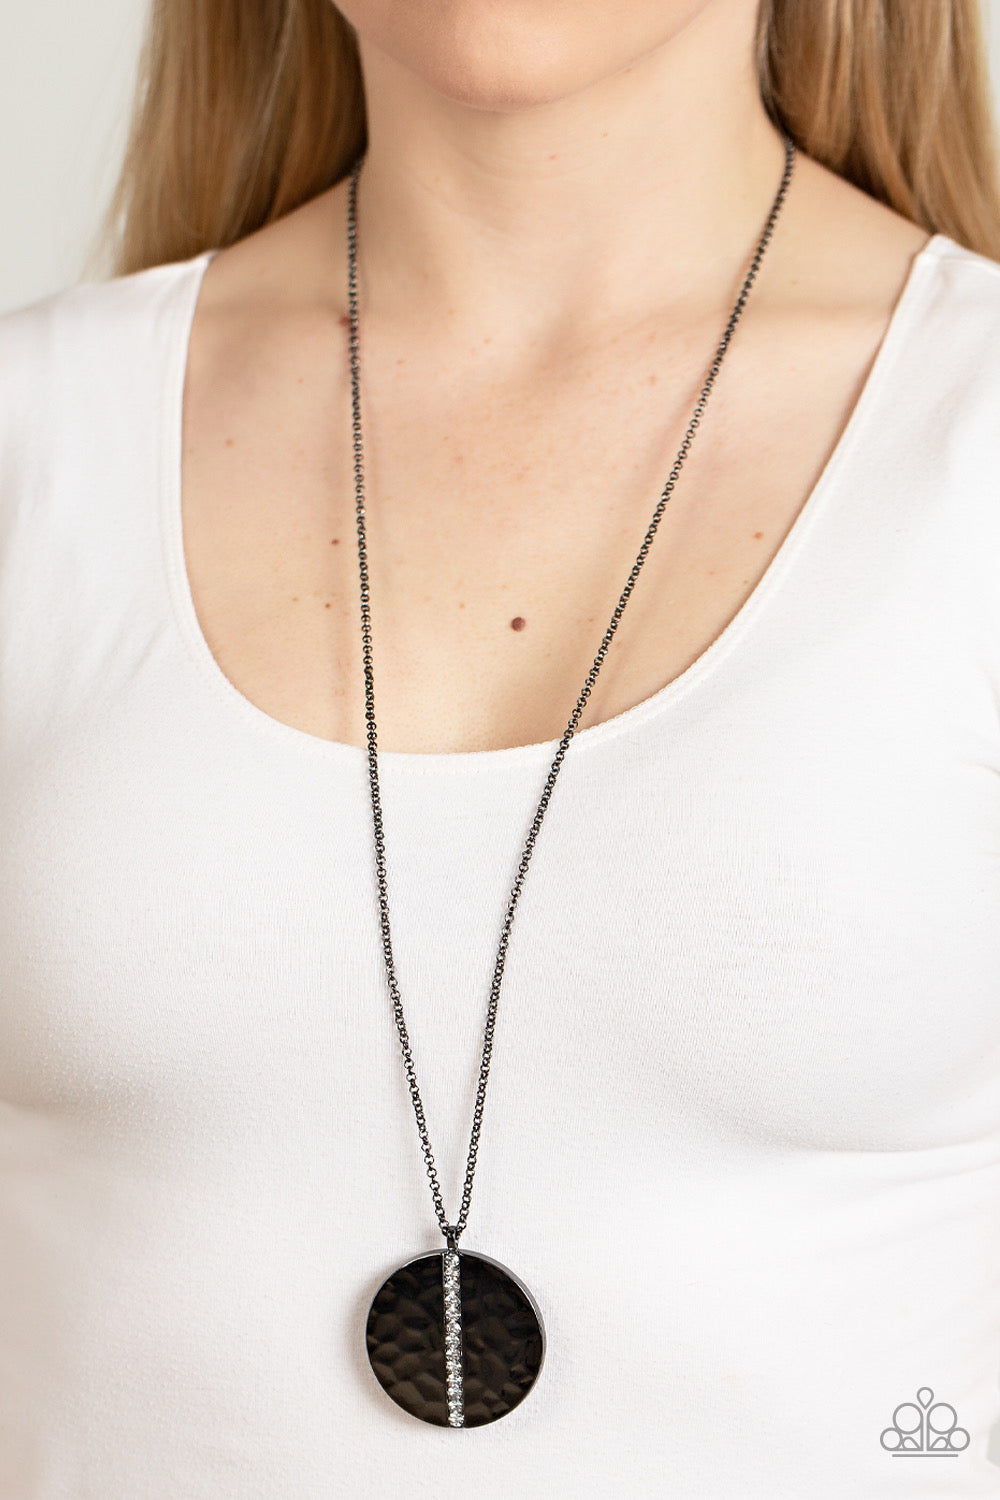 Paparazzi Token of My Gratitude - Black Necklace - A Finishing Touch Jewelry